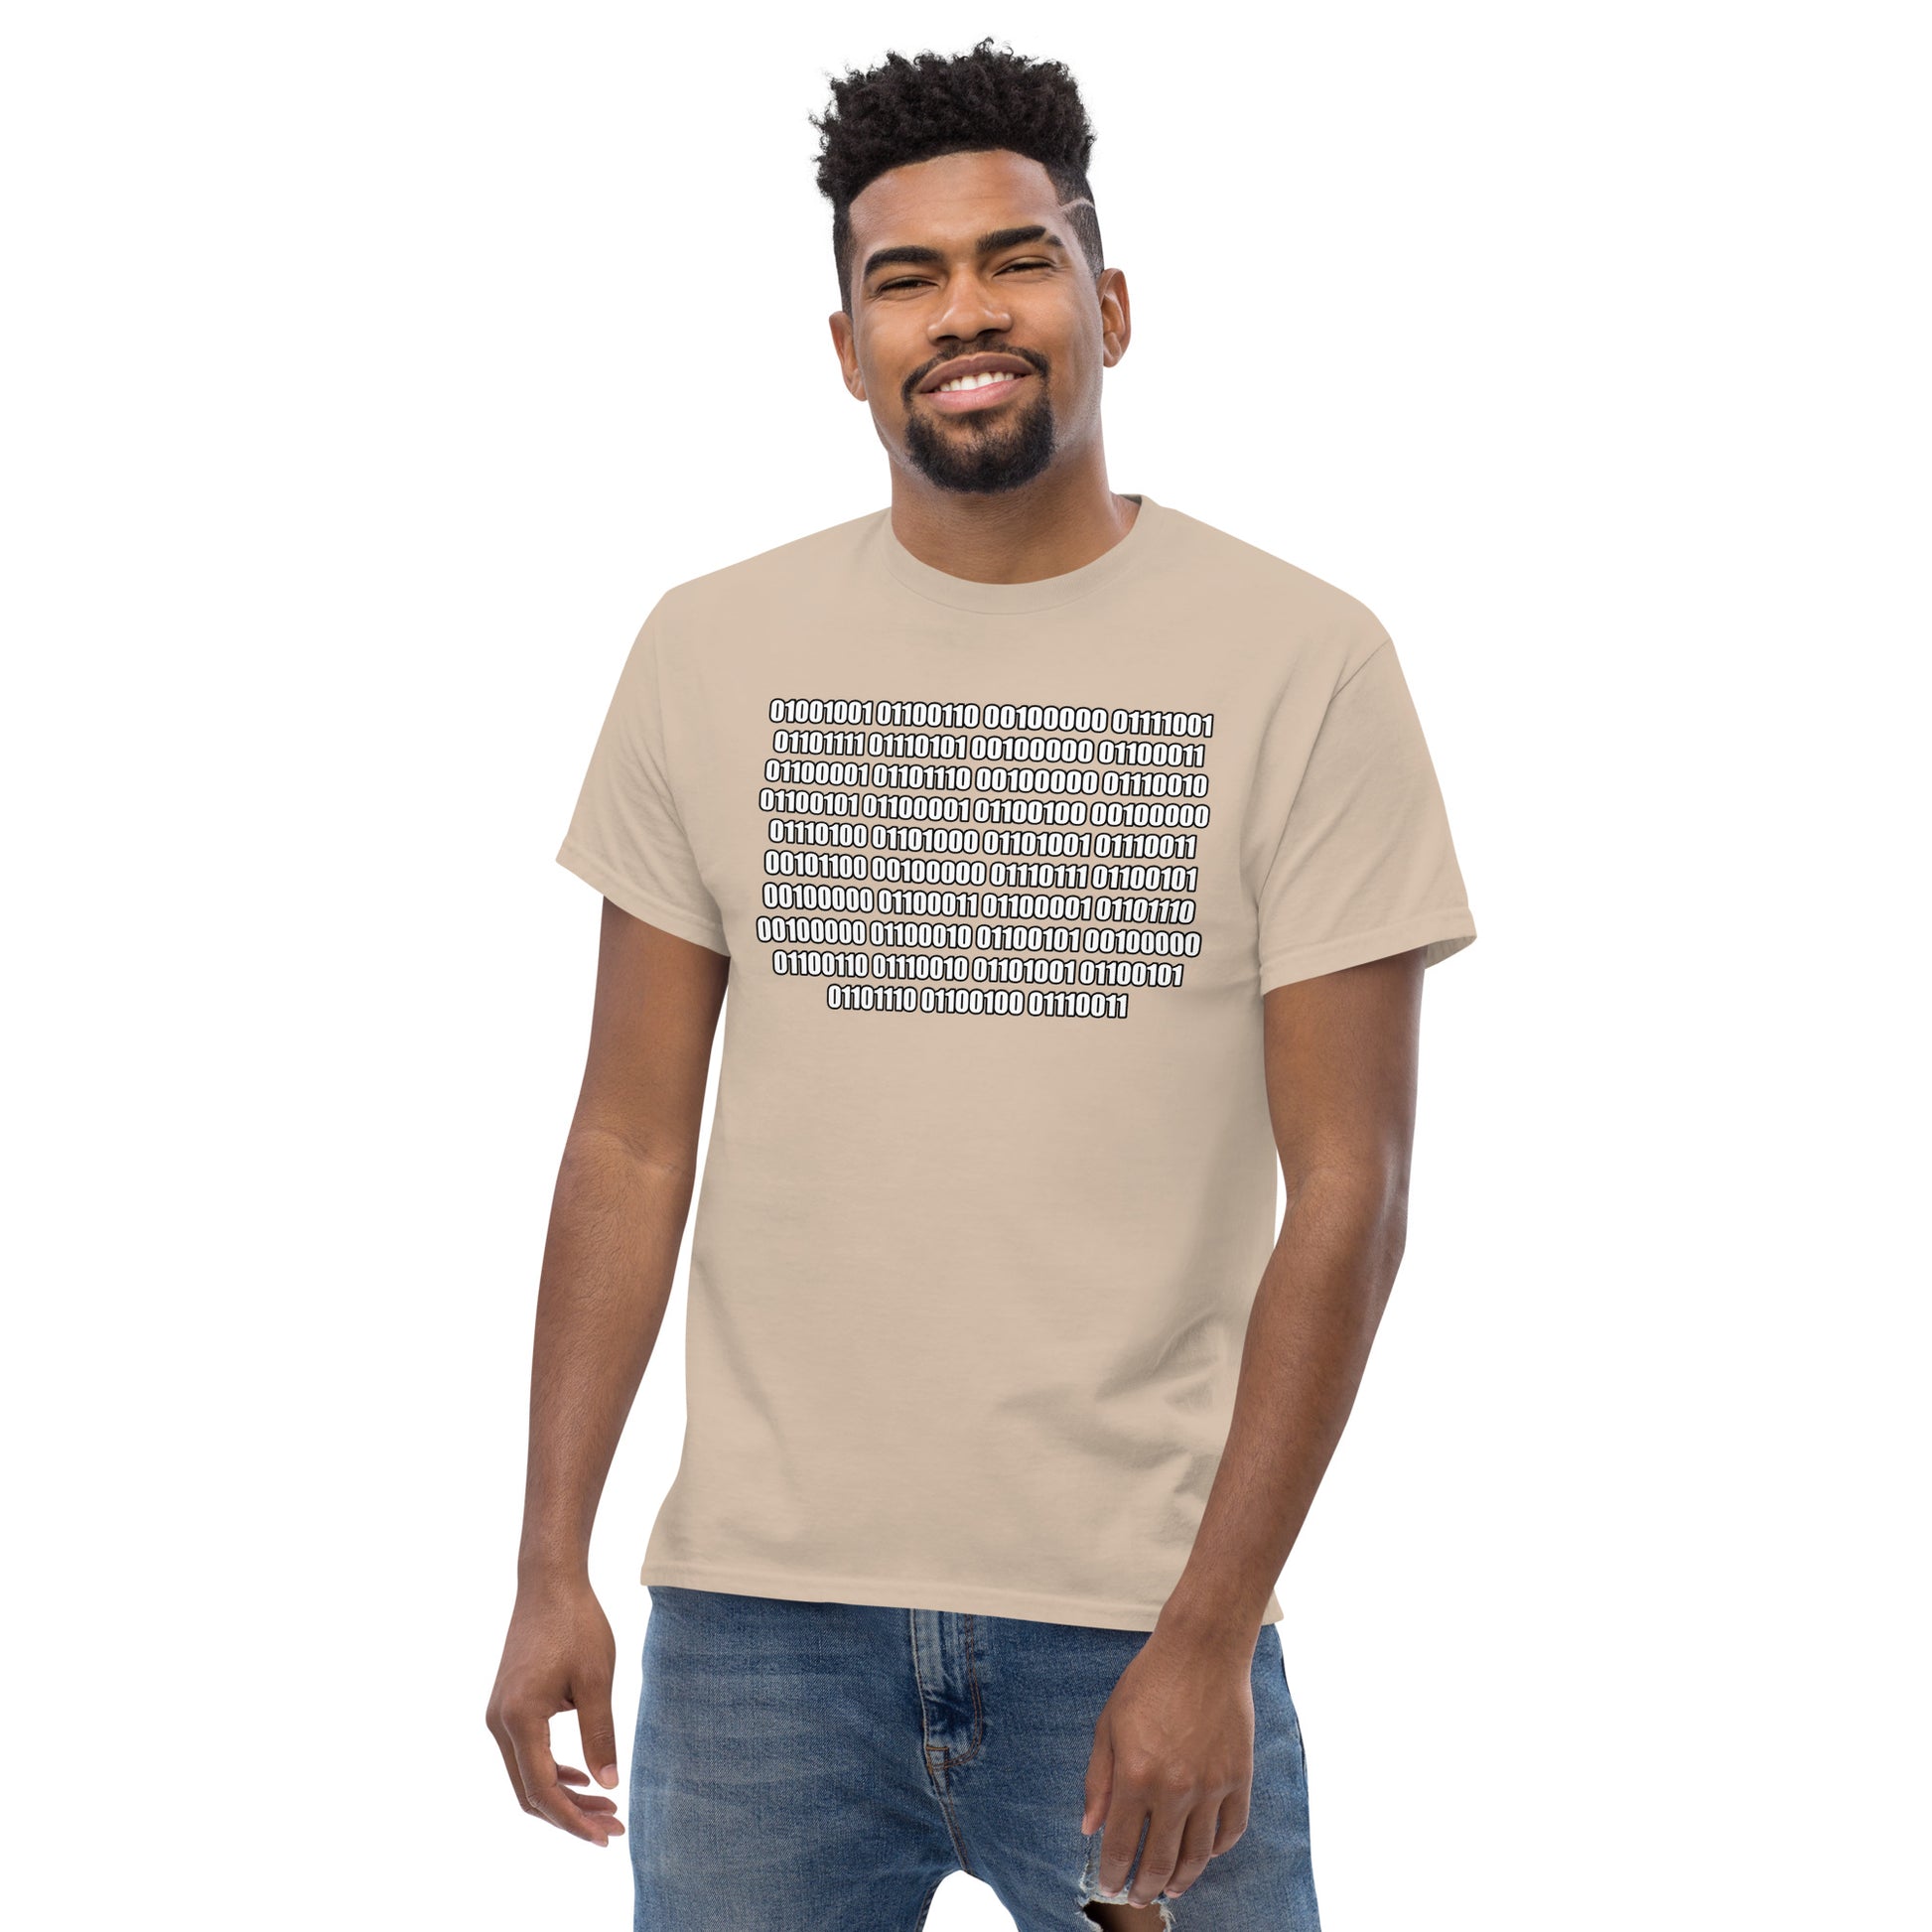 Men with sand t-shirt with binaire text "If you can read this"